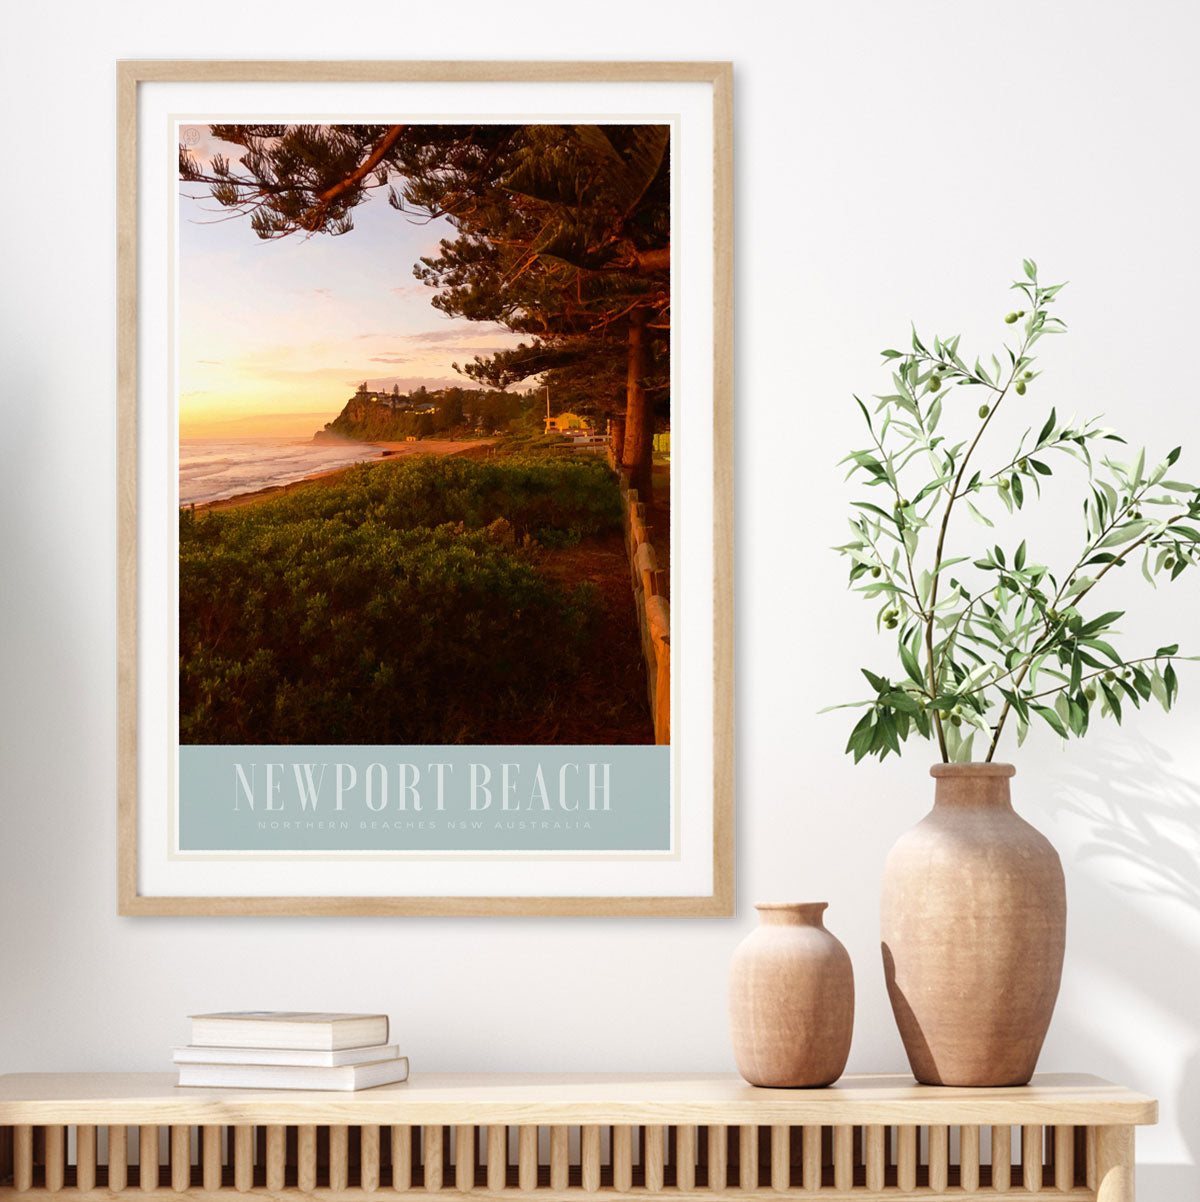 Newport beach retro vintage print from places we luv